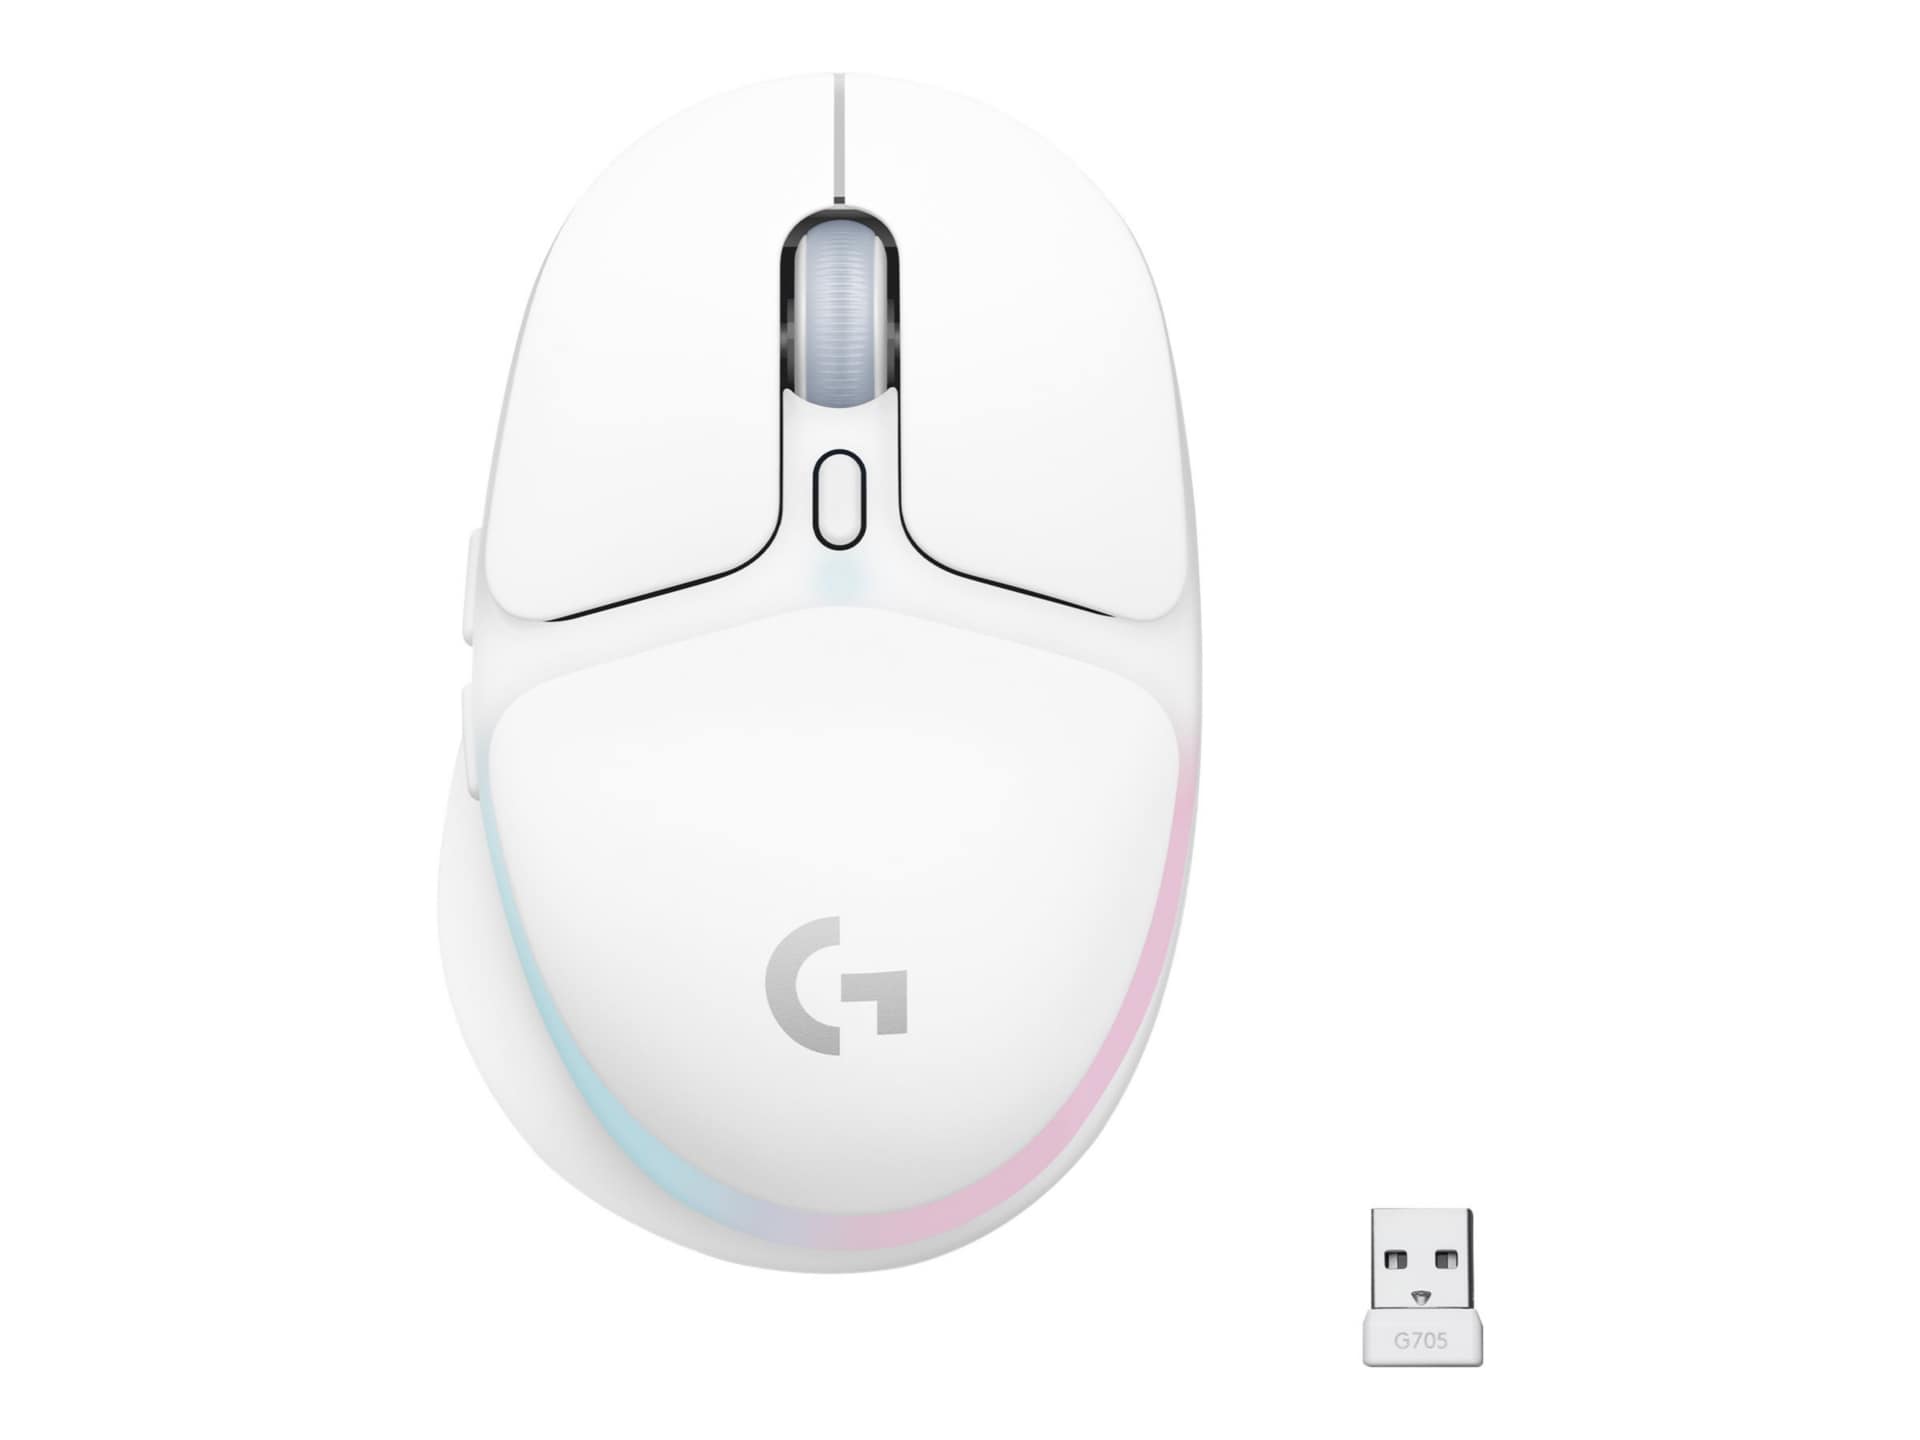 Logitech G705 Wireless Gaming Mouse - White Mist - mouse - small hands - Bl